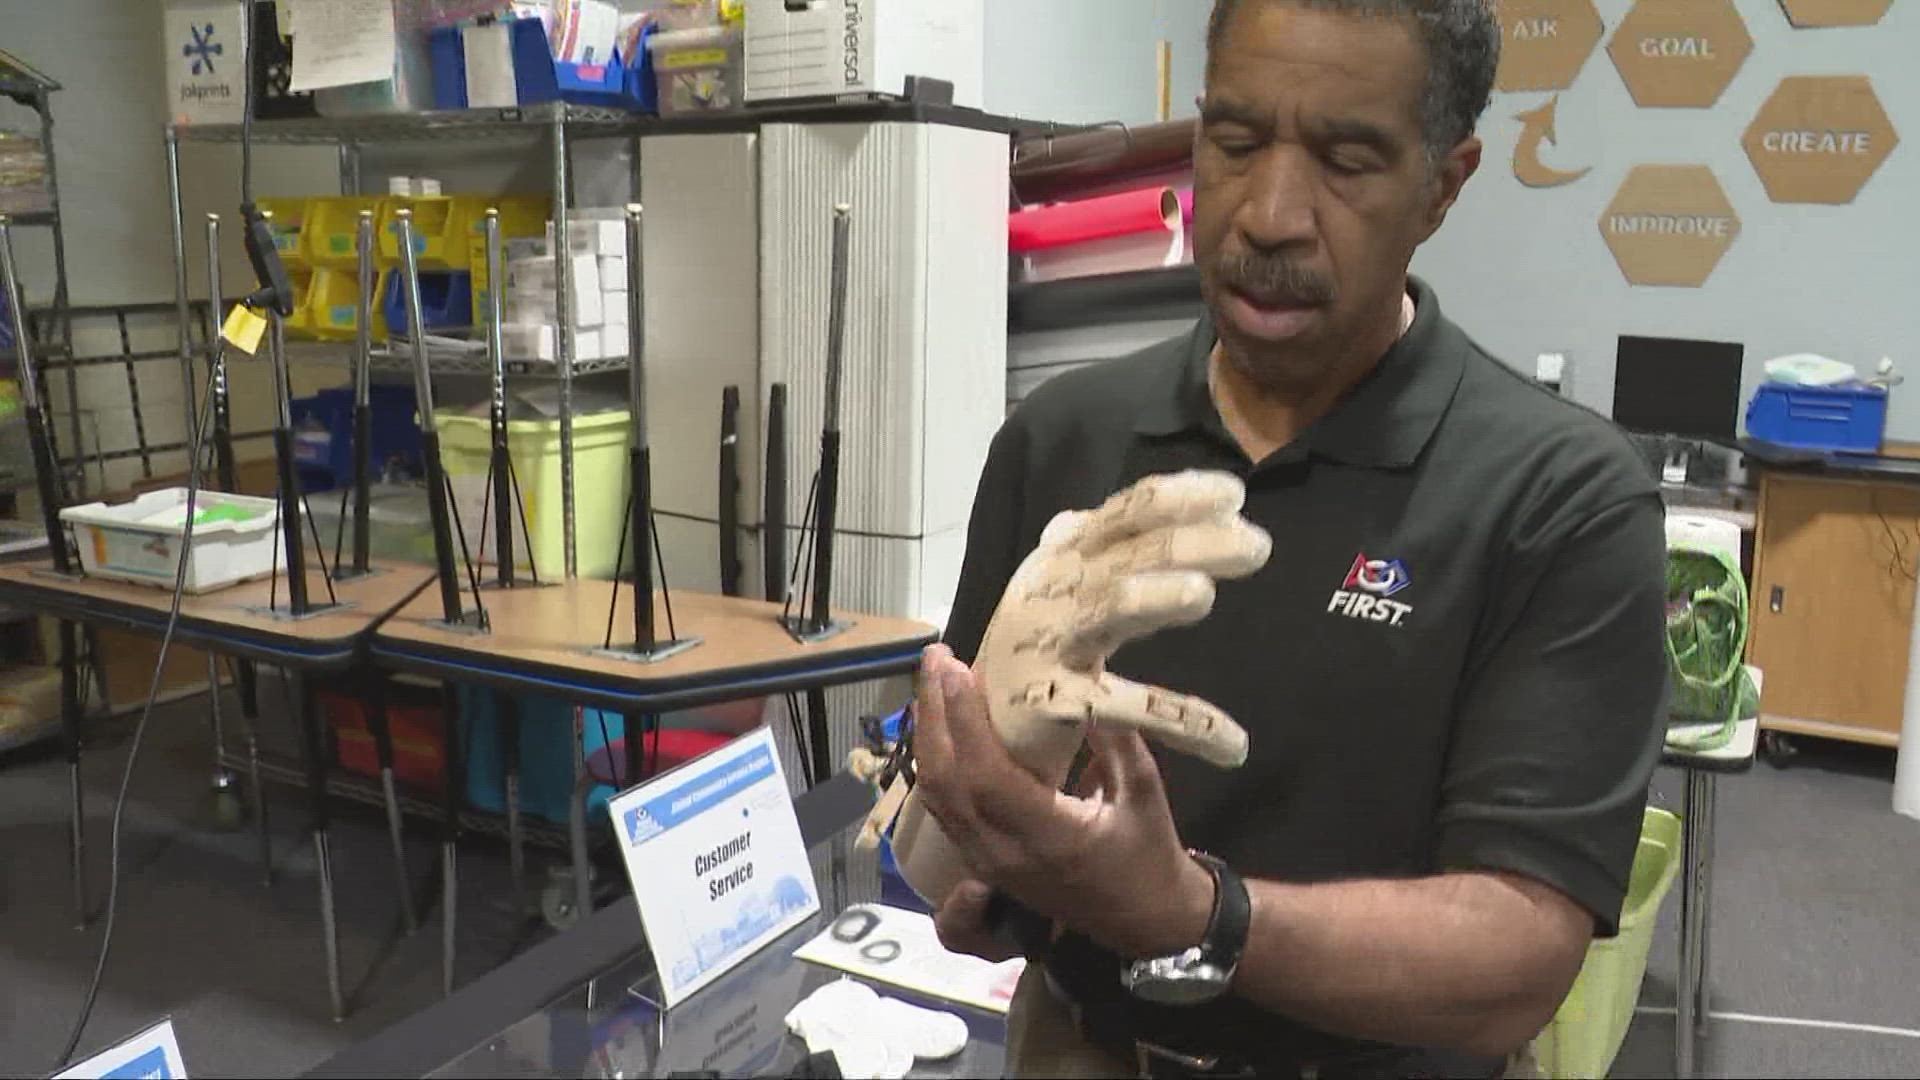 Cleveland students use technology to build prosthetic limbs